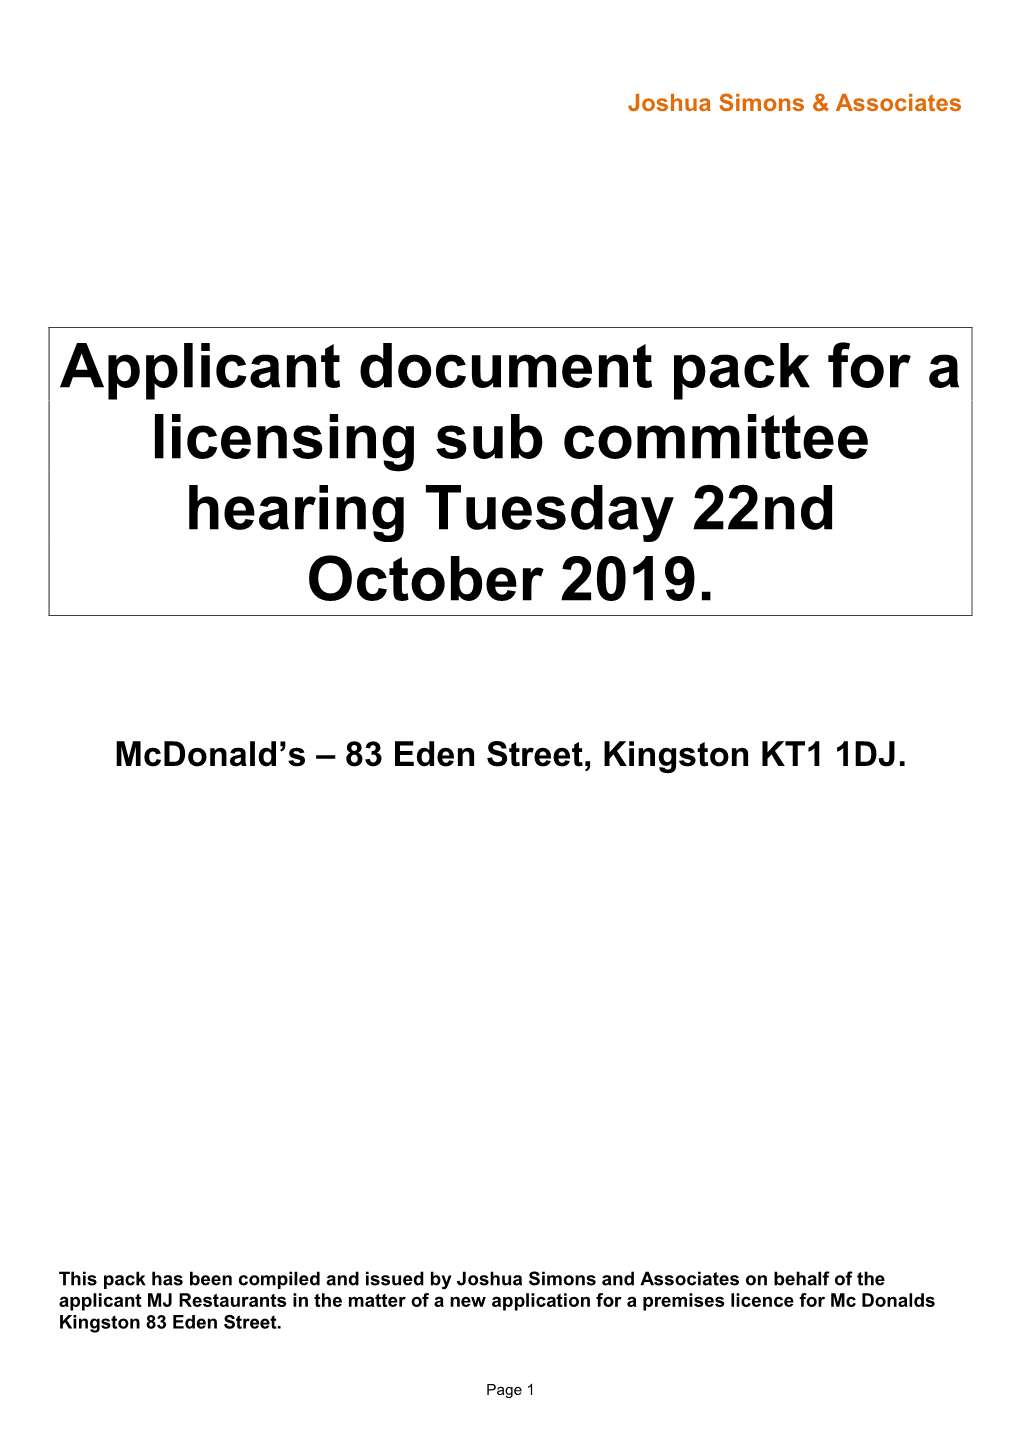 Applicant Document Pack for a Licensing Sub Committee Hearing Tuesday 22Nd October 2019